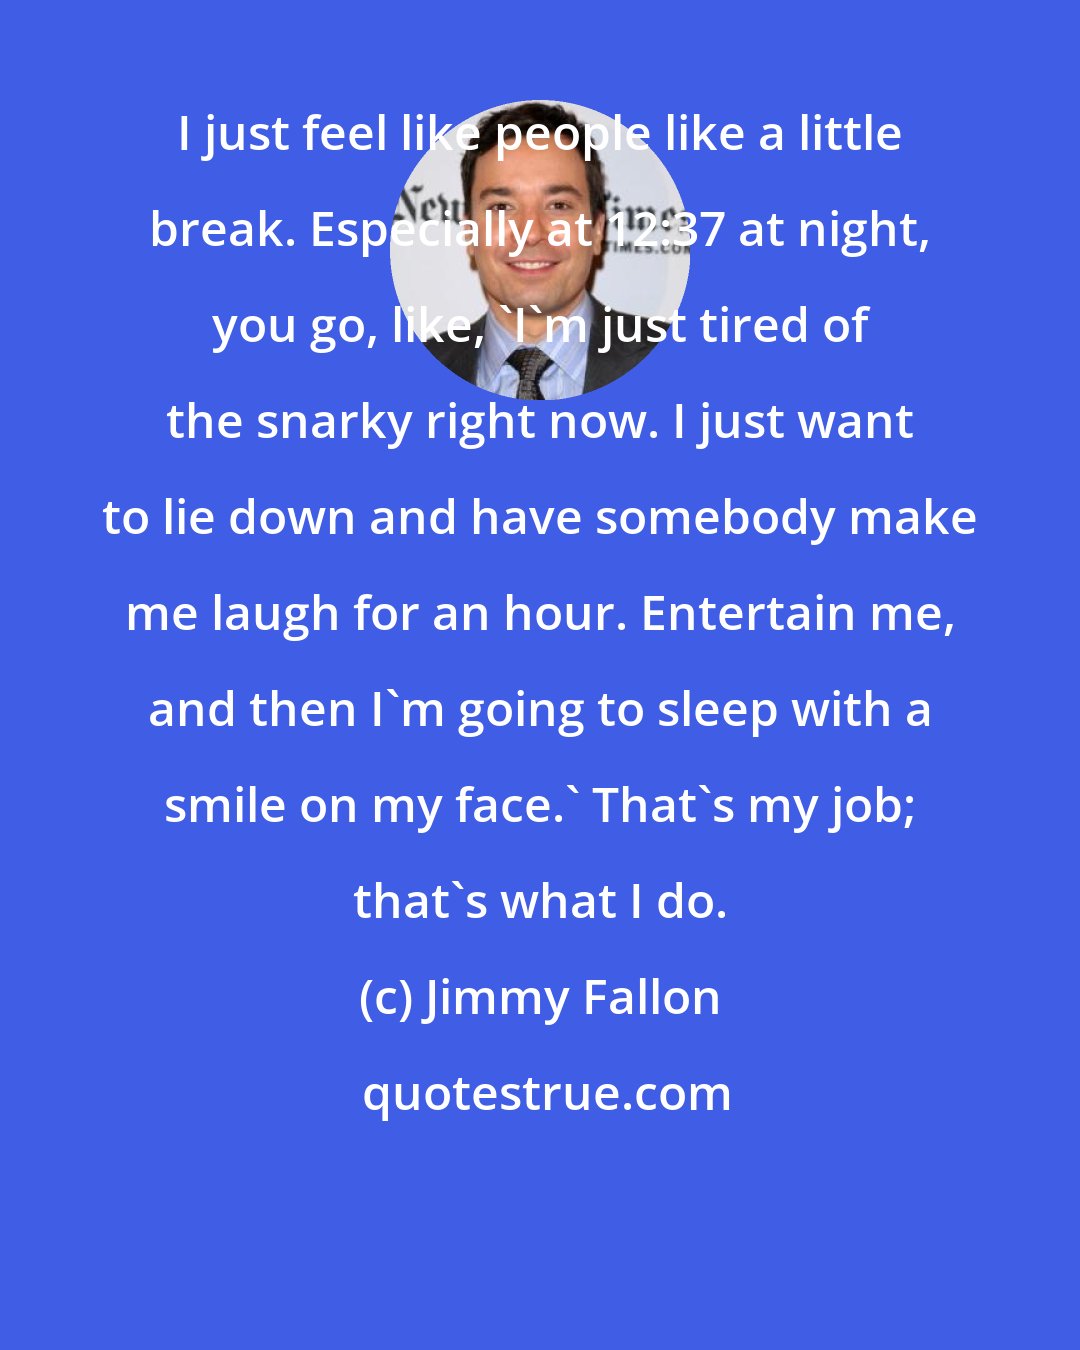 Jimmy Fallon: I just feel like people like a little break. Especially at 12:37 at night, you go, like, 'I'm just tired of the snarky right now. I just want to lie down and have somebody make me laugh for an hour. Entertain me, and then I'm going to sleep with a smile on my face.' That's my job; that's what I do.